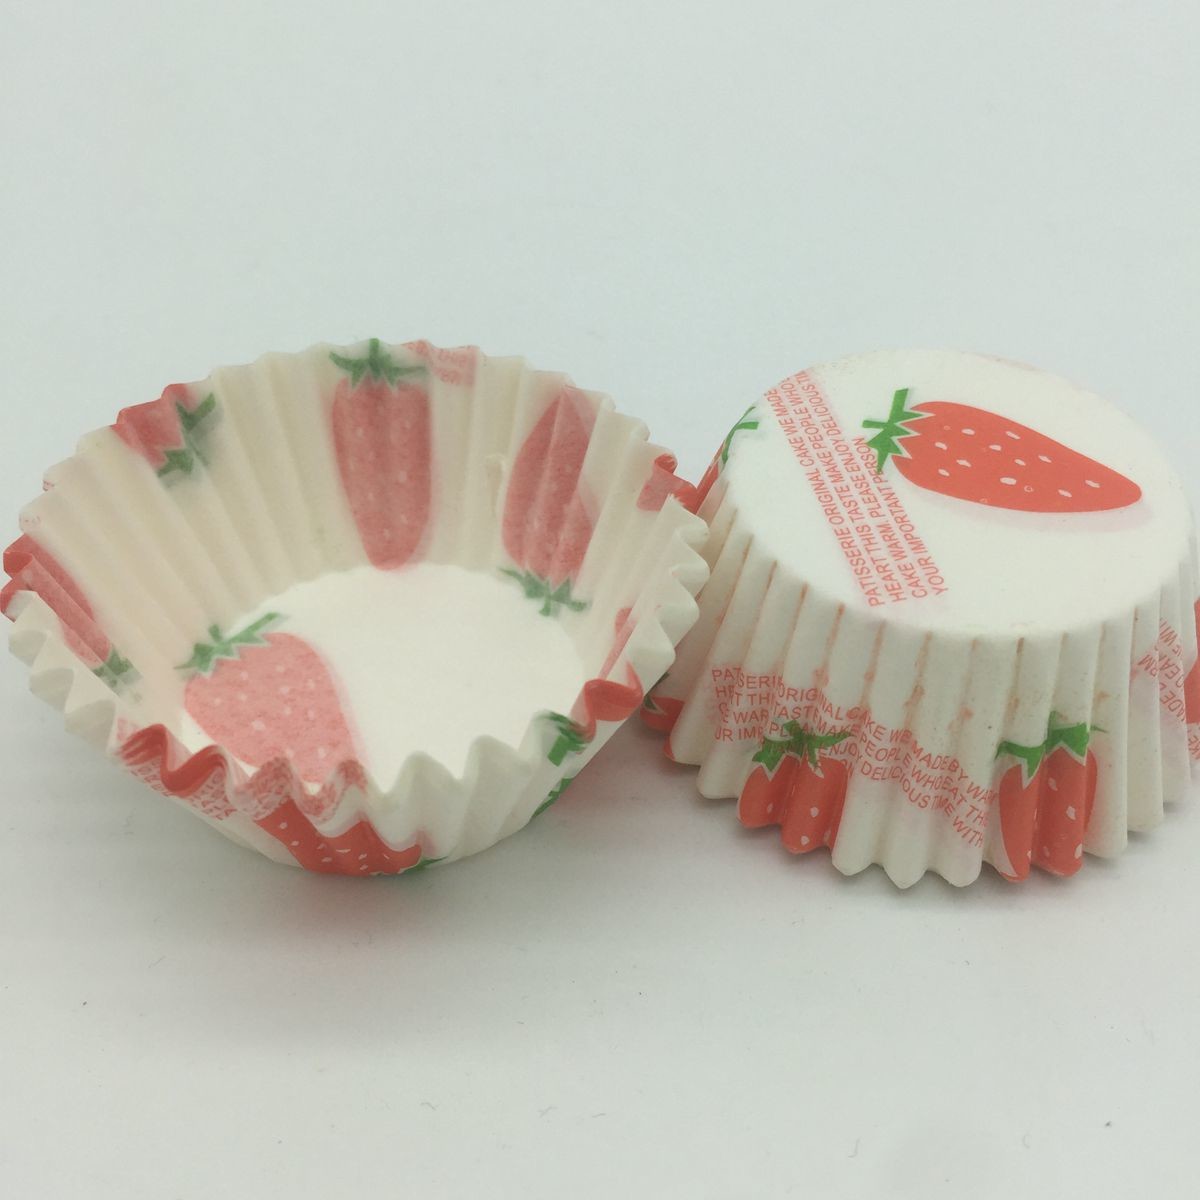 Buy White And Red Greaseproof Cupcake Liners Disposable Baking Paper Cup Mini Strawberry Pattern at wholesale prices